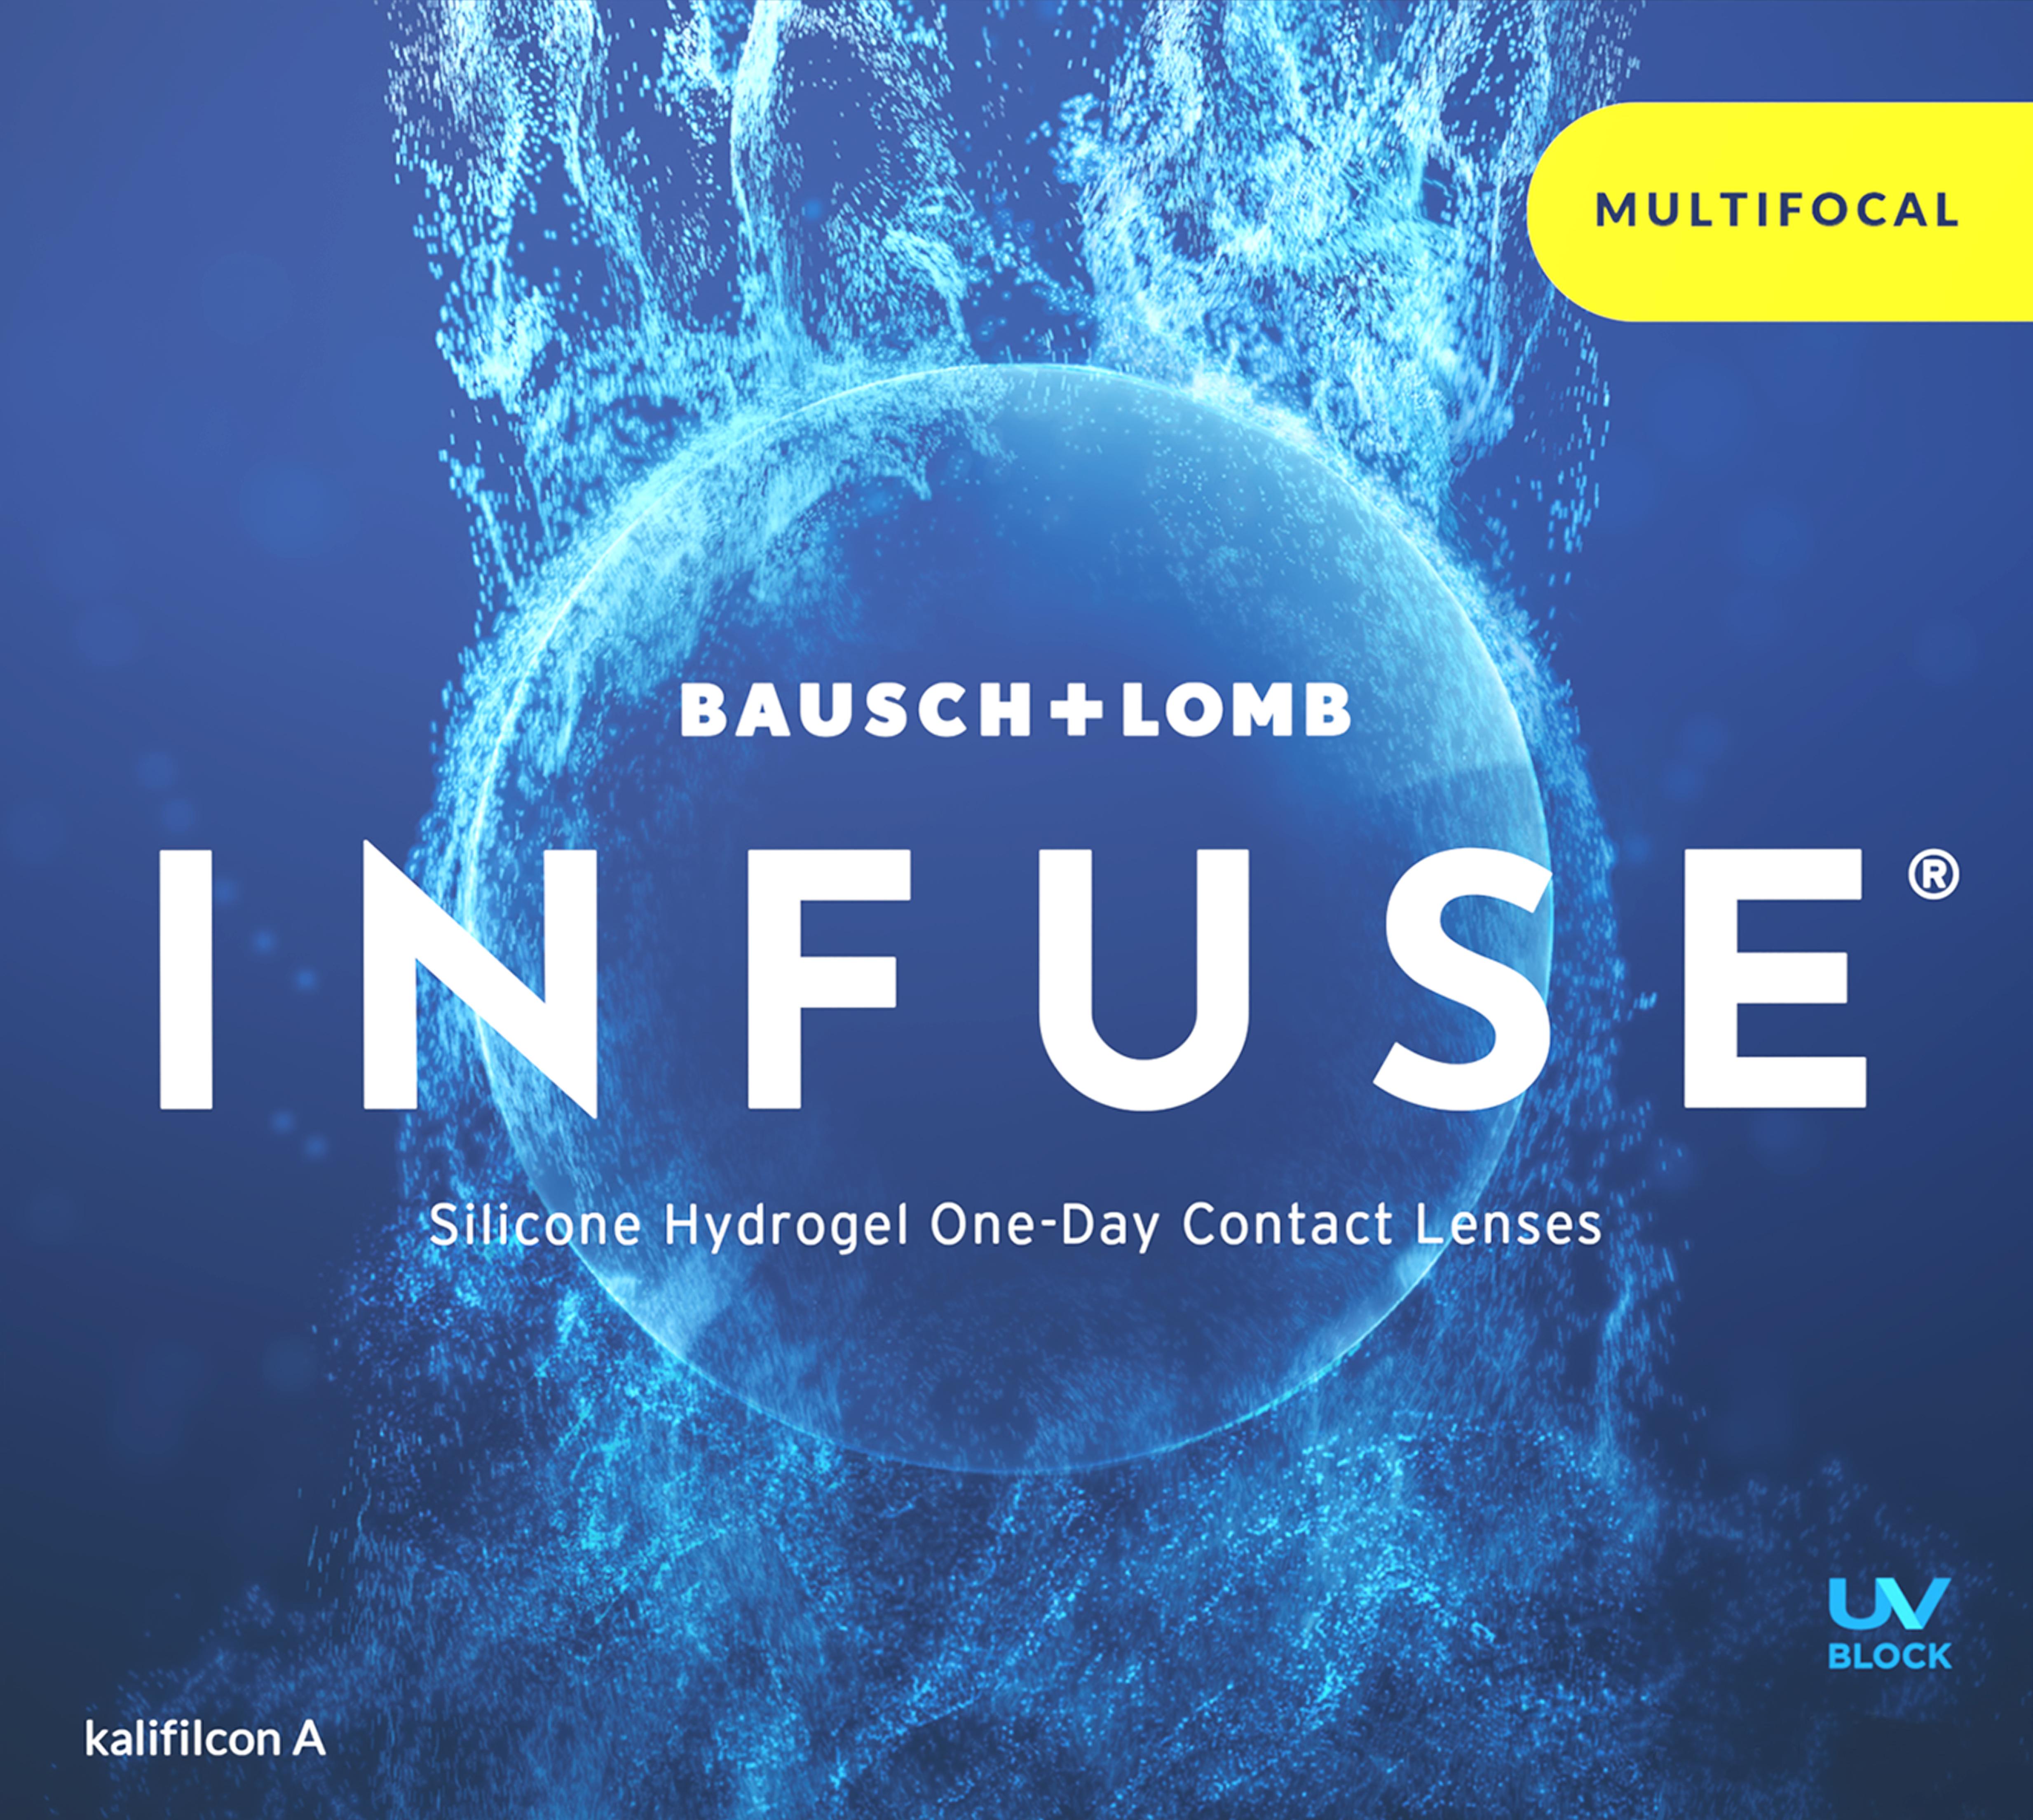 Bausch + Lomb Infuse Multifocal